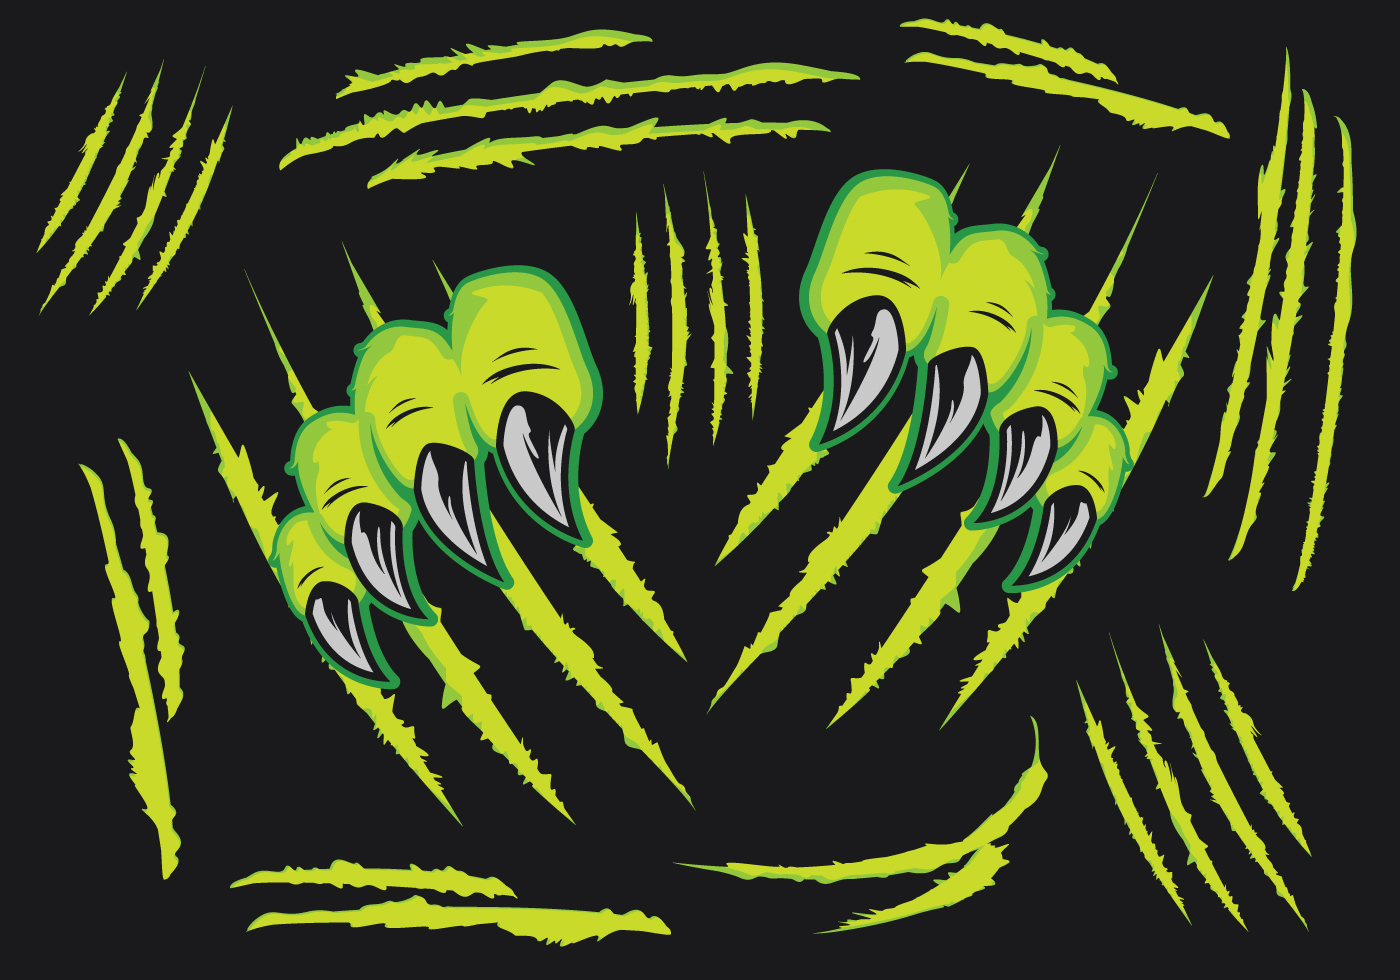 Download Monsters Claw Scratches - Download Free Vectors, Clipart ...